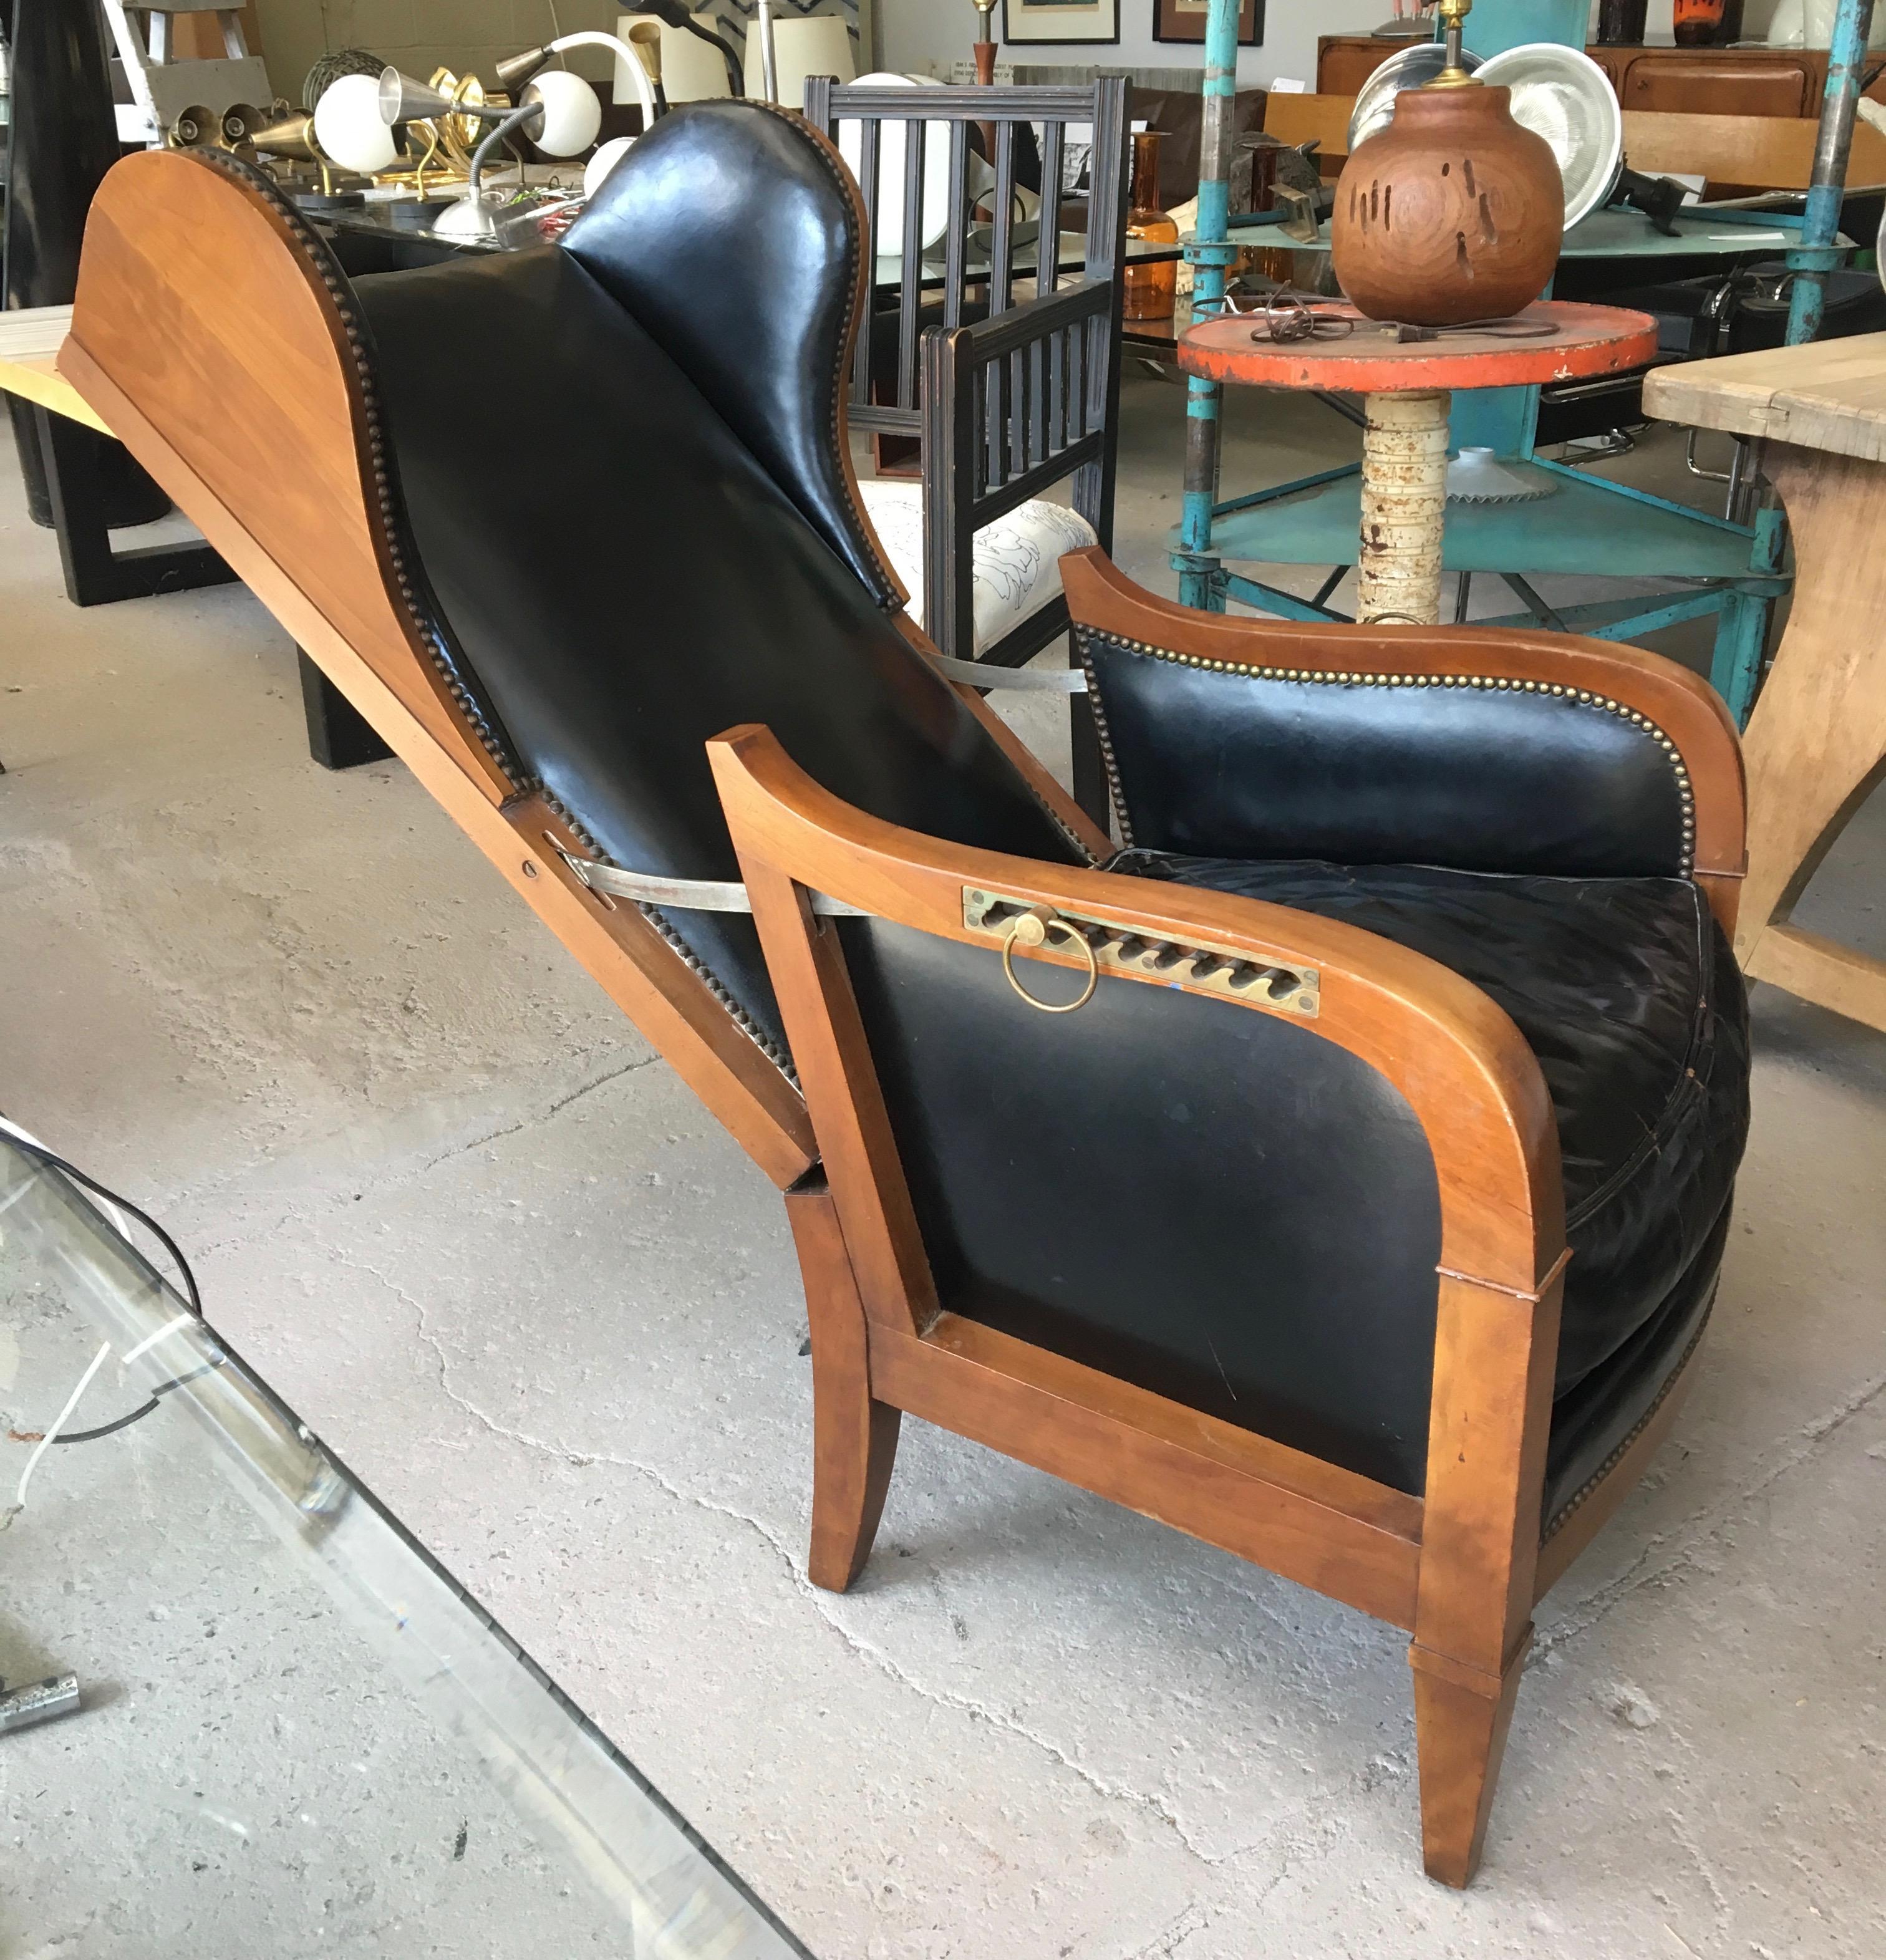 Clever and handsome 1950s French Art Deco style adjustable back wing chair in walnut wood with solid brass adjustable back mechanism. Original black leatherette is distressed but chic, brass nail heads; the chair back reclines easily.